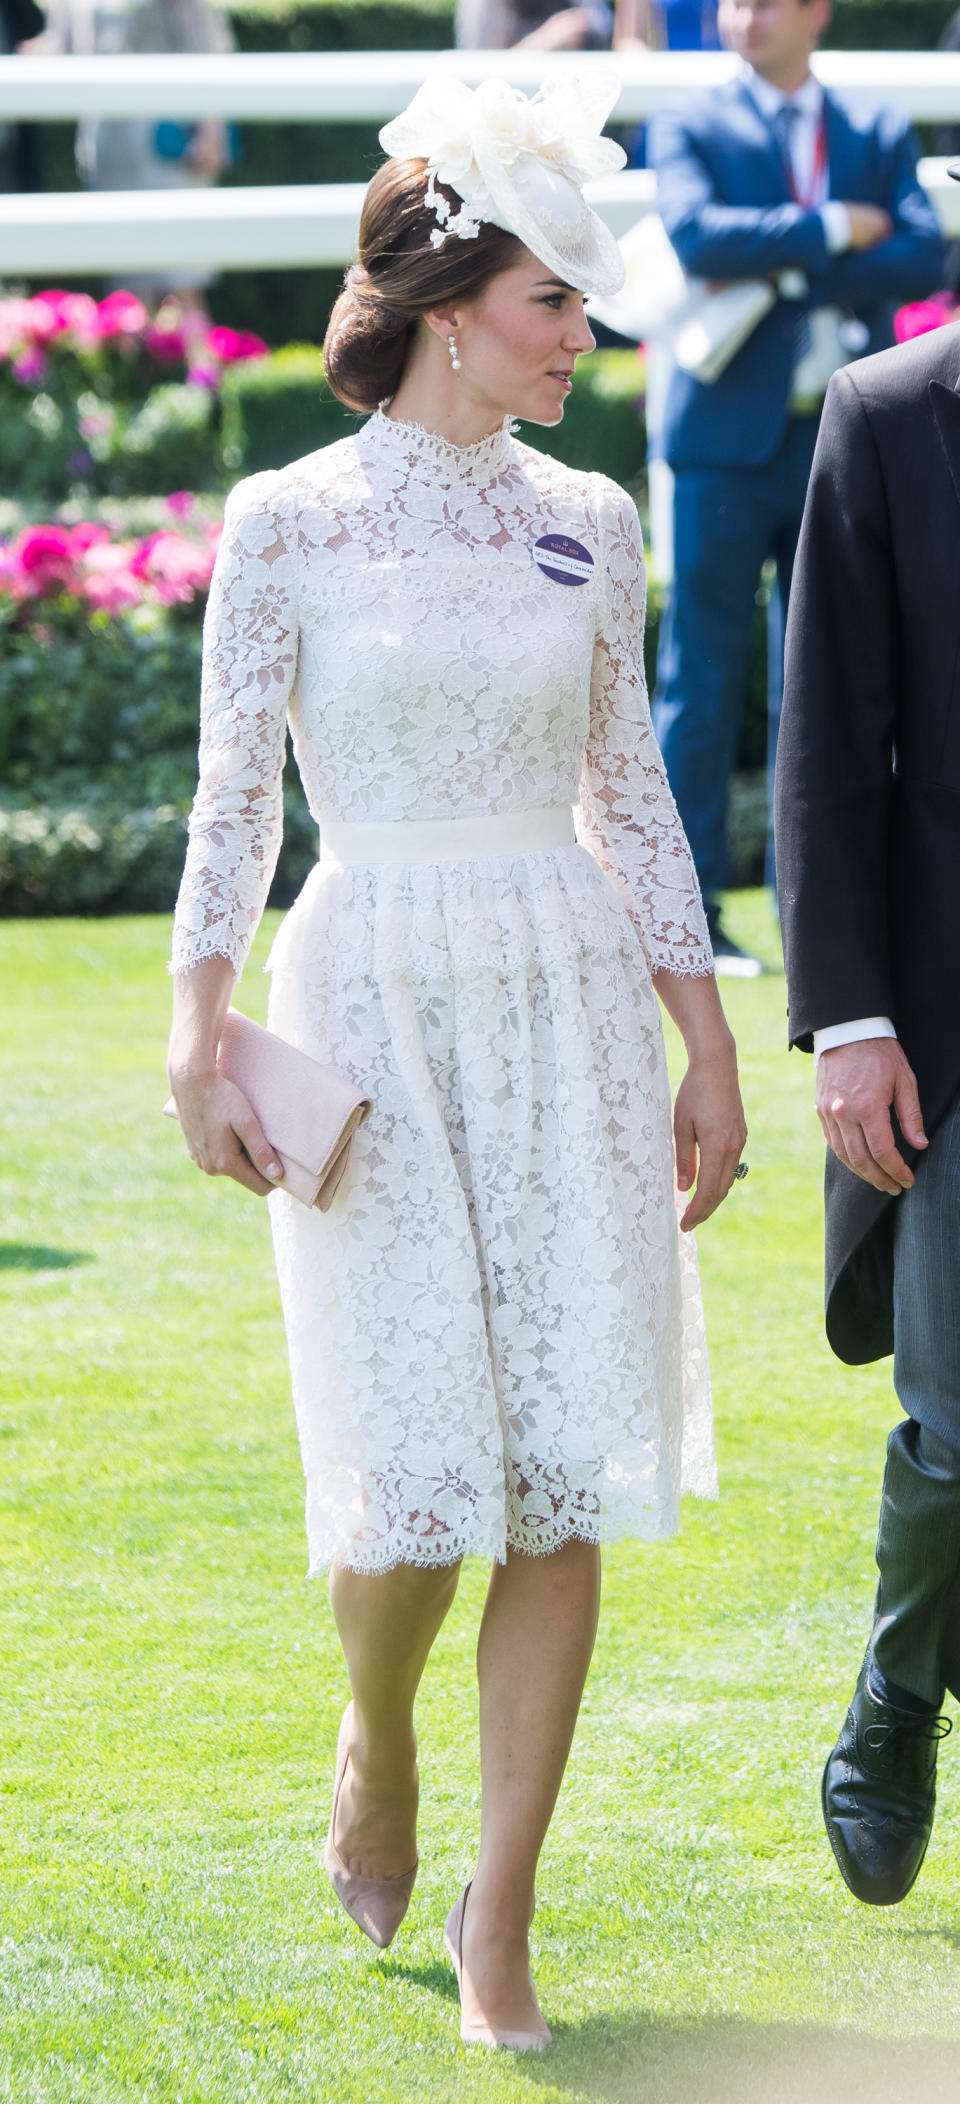 Middleton wore a similar lace dress by Alexander McQueen in 2017.